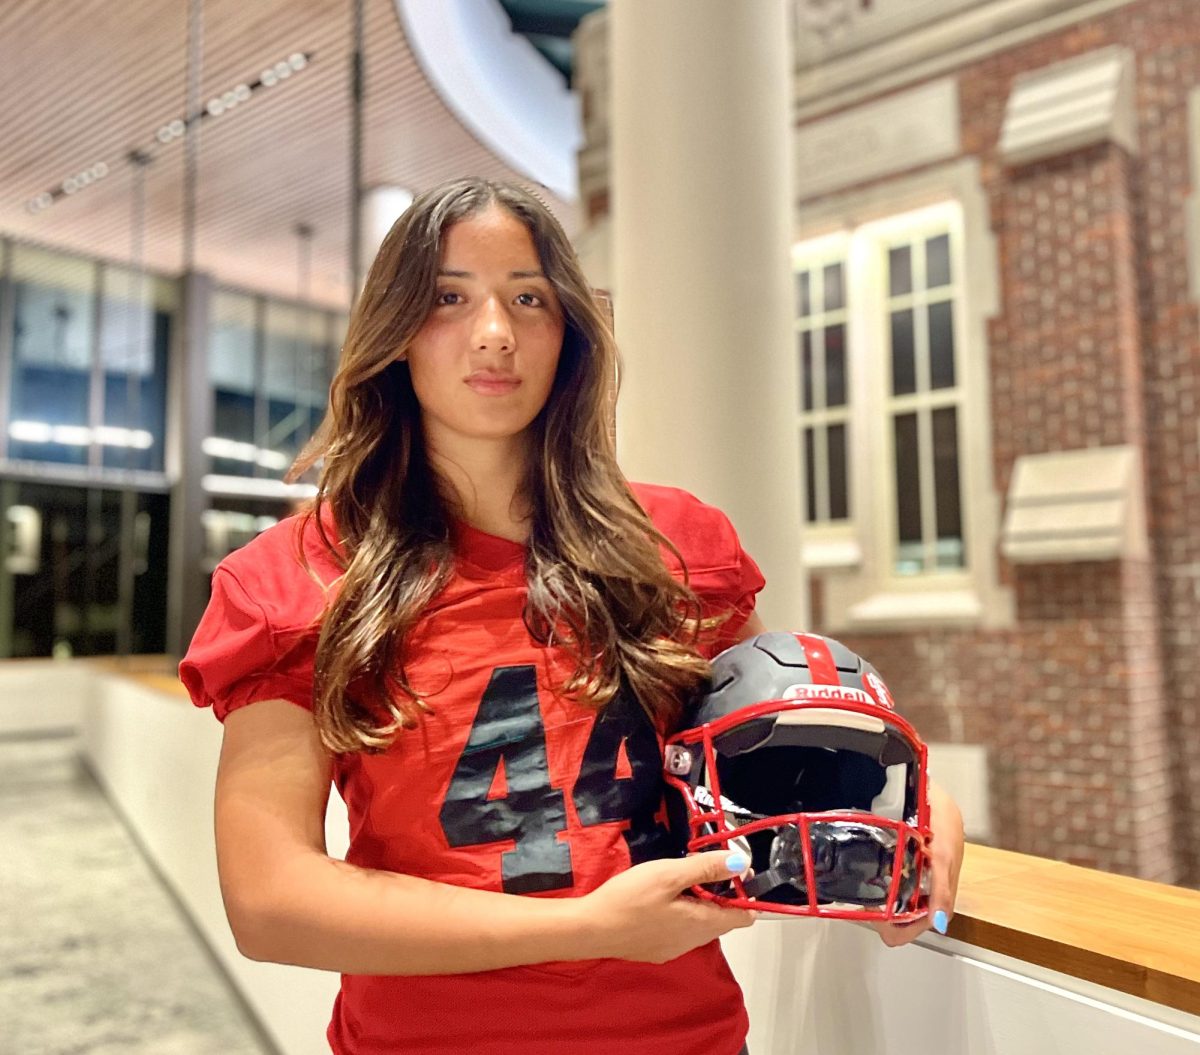 Juniper Schwartzman `27 joined the football team as a kicker. She became the first woman to play and score for the team during their Sept. 30 game against Lawrence University.